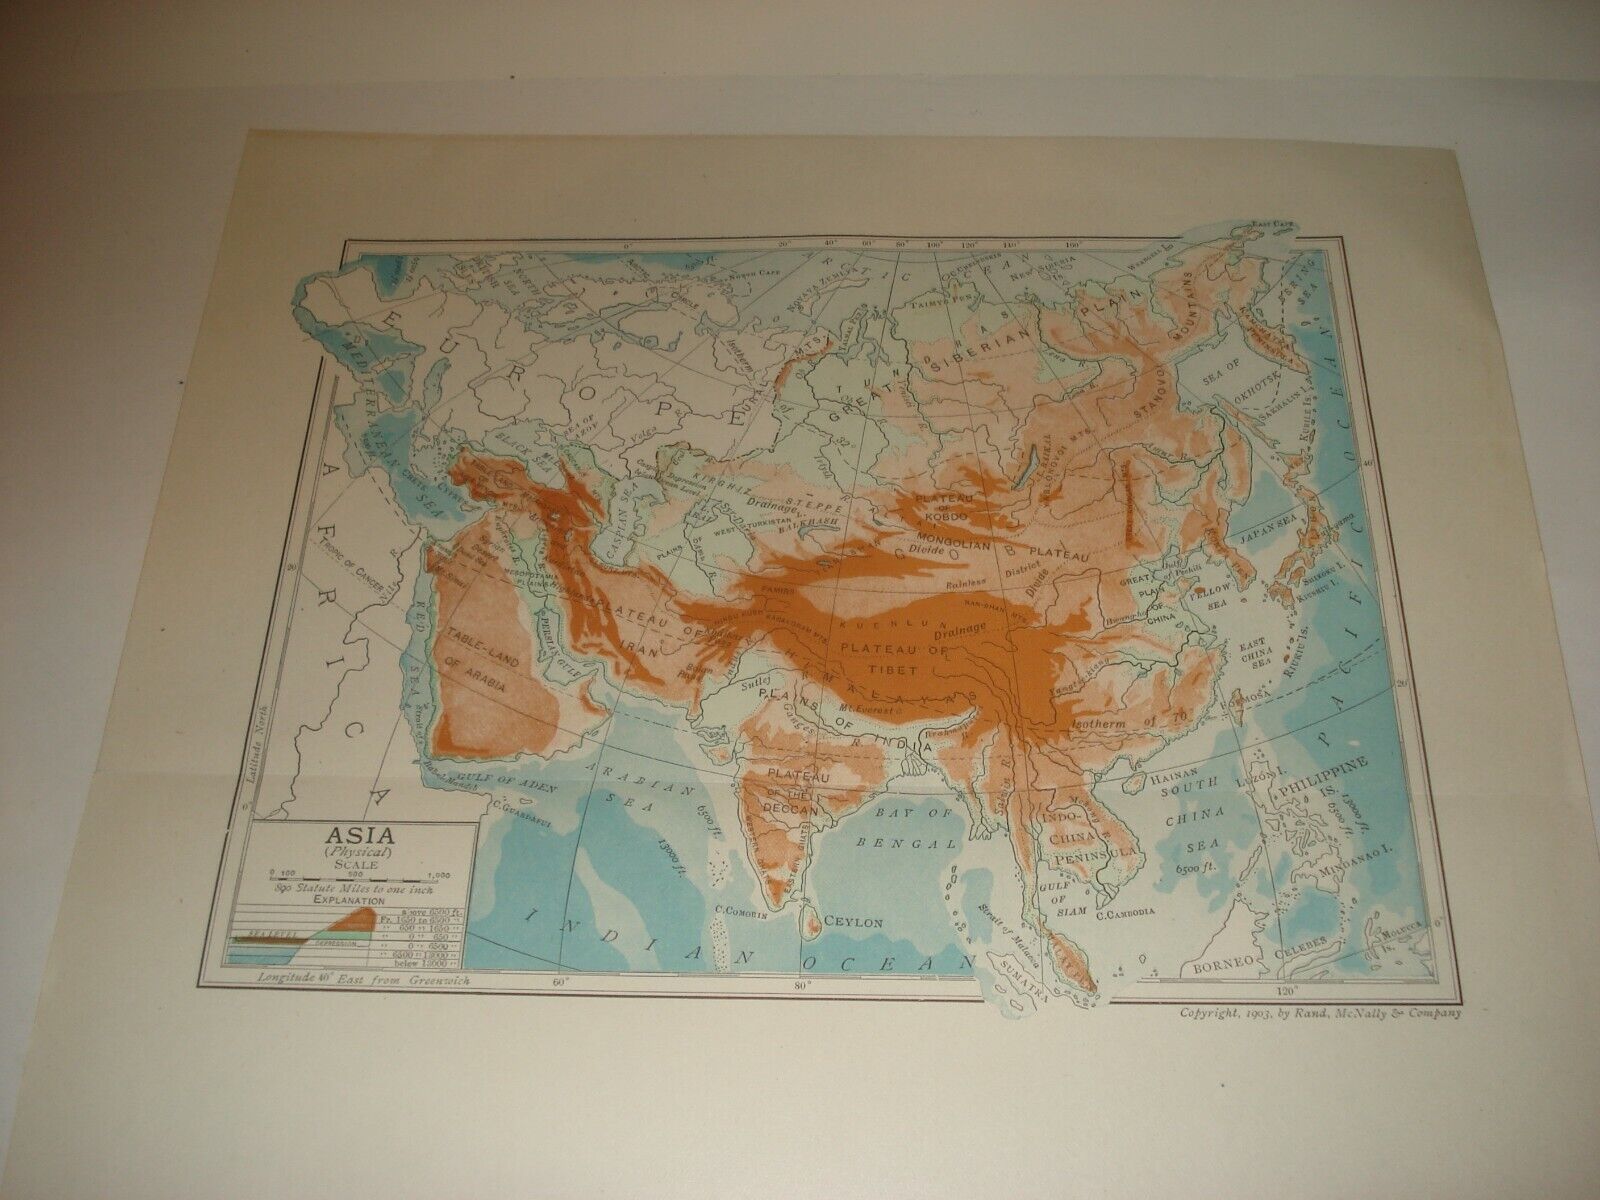 Lot of 5 Antique Maps 1903 1904  Asia Colorful Map Relief Rand McNally Без бренда - фотография #7